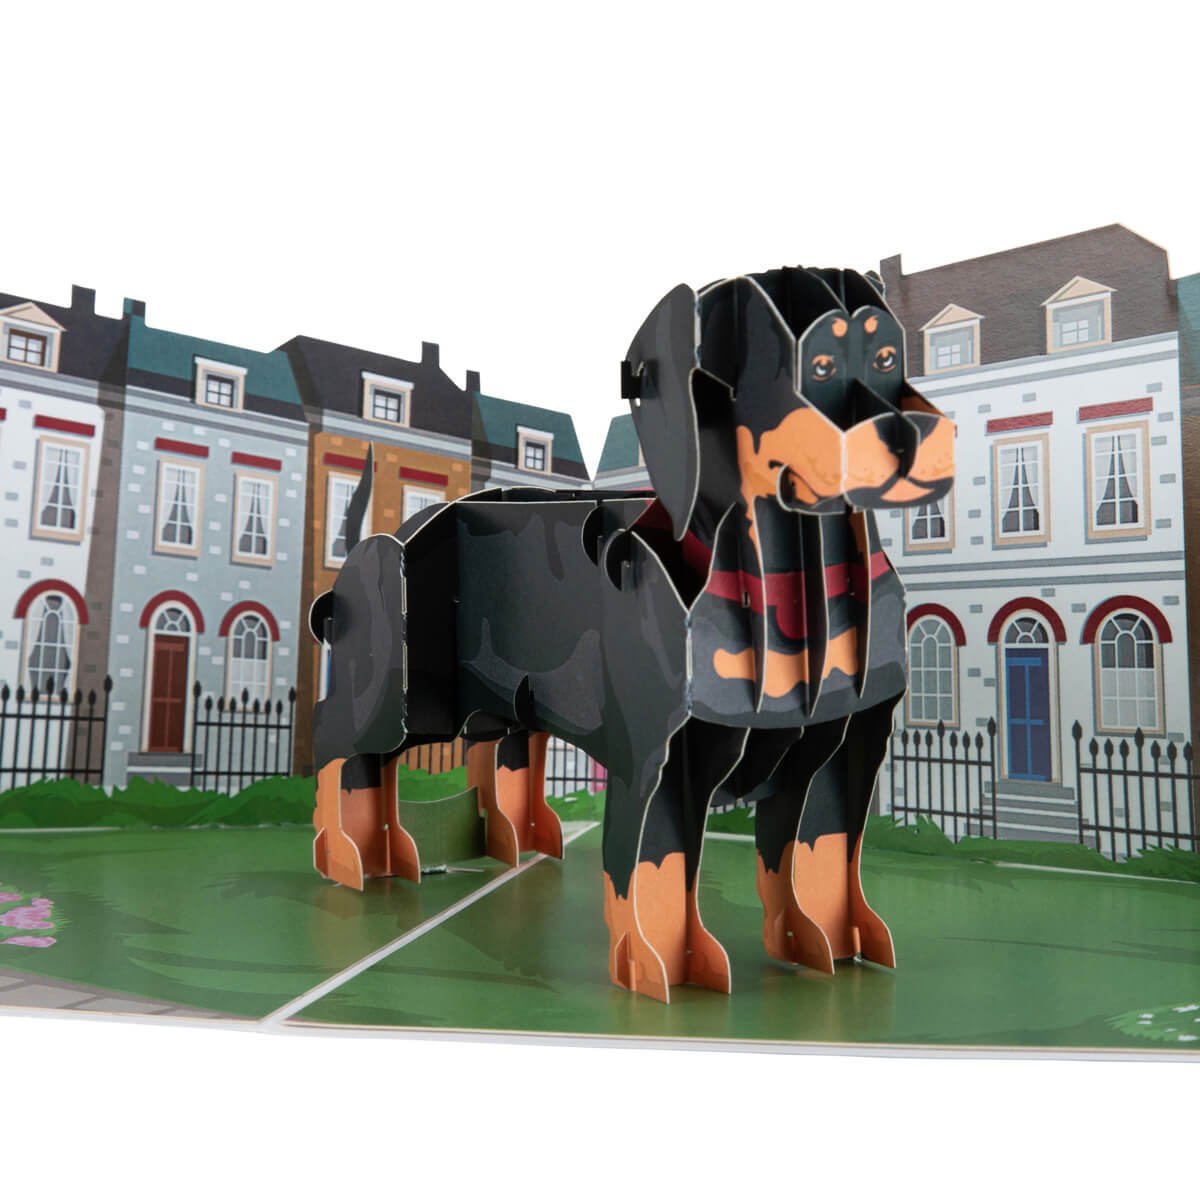 dachshund pop up card by cardology - close up image of sausage dog greeting card